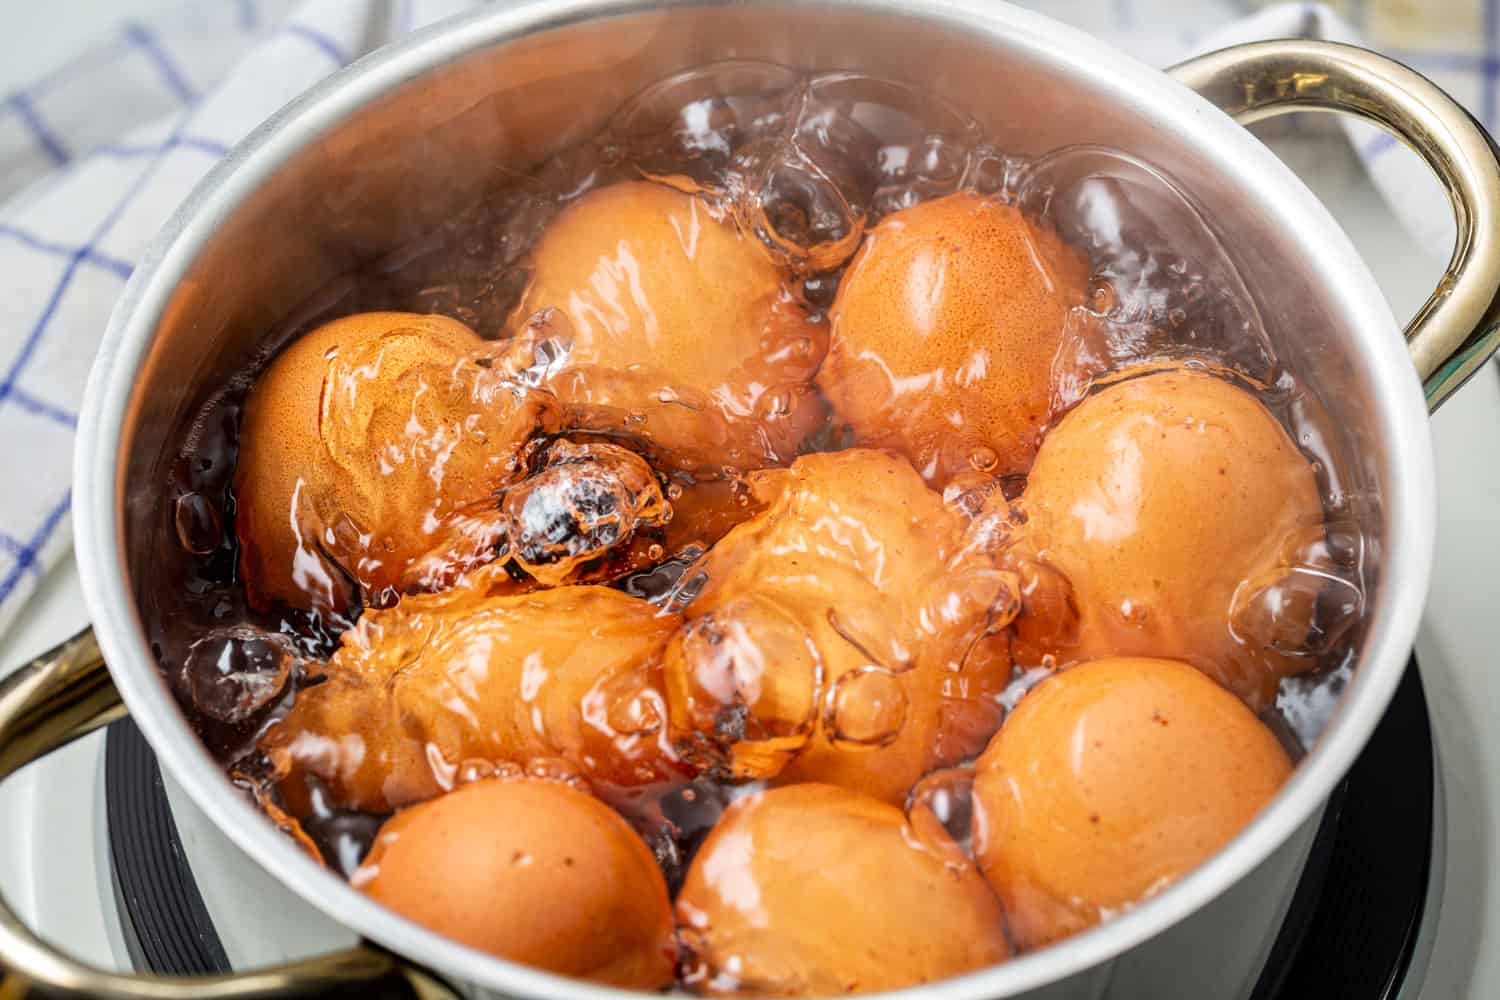 Tips and tricks for boiling an egg while not cracking